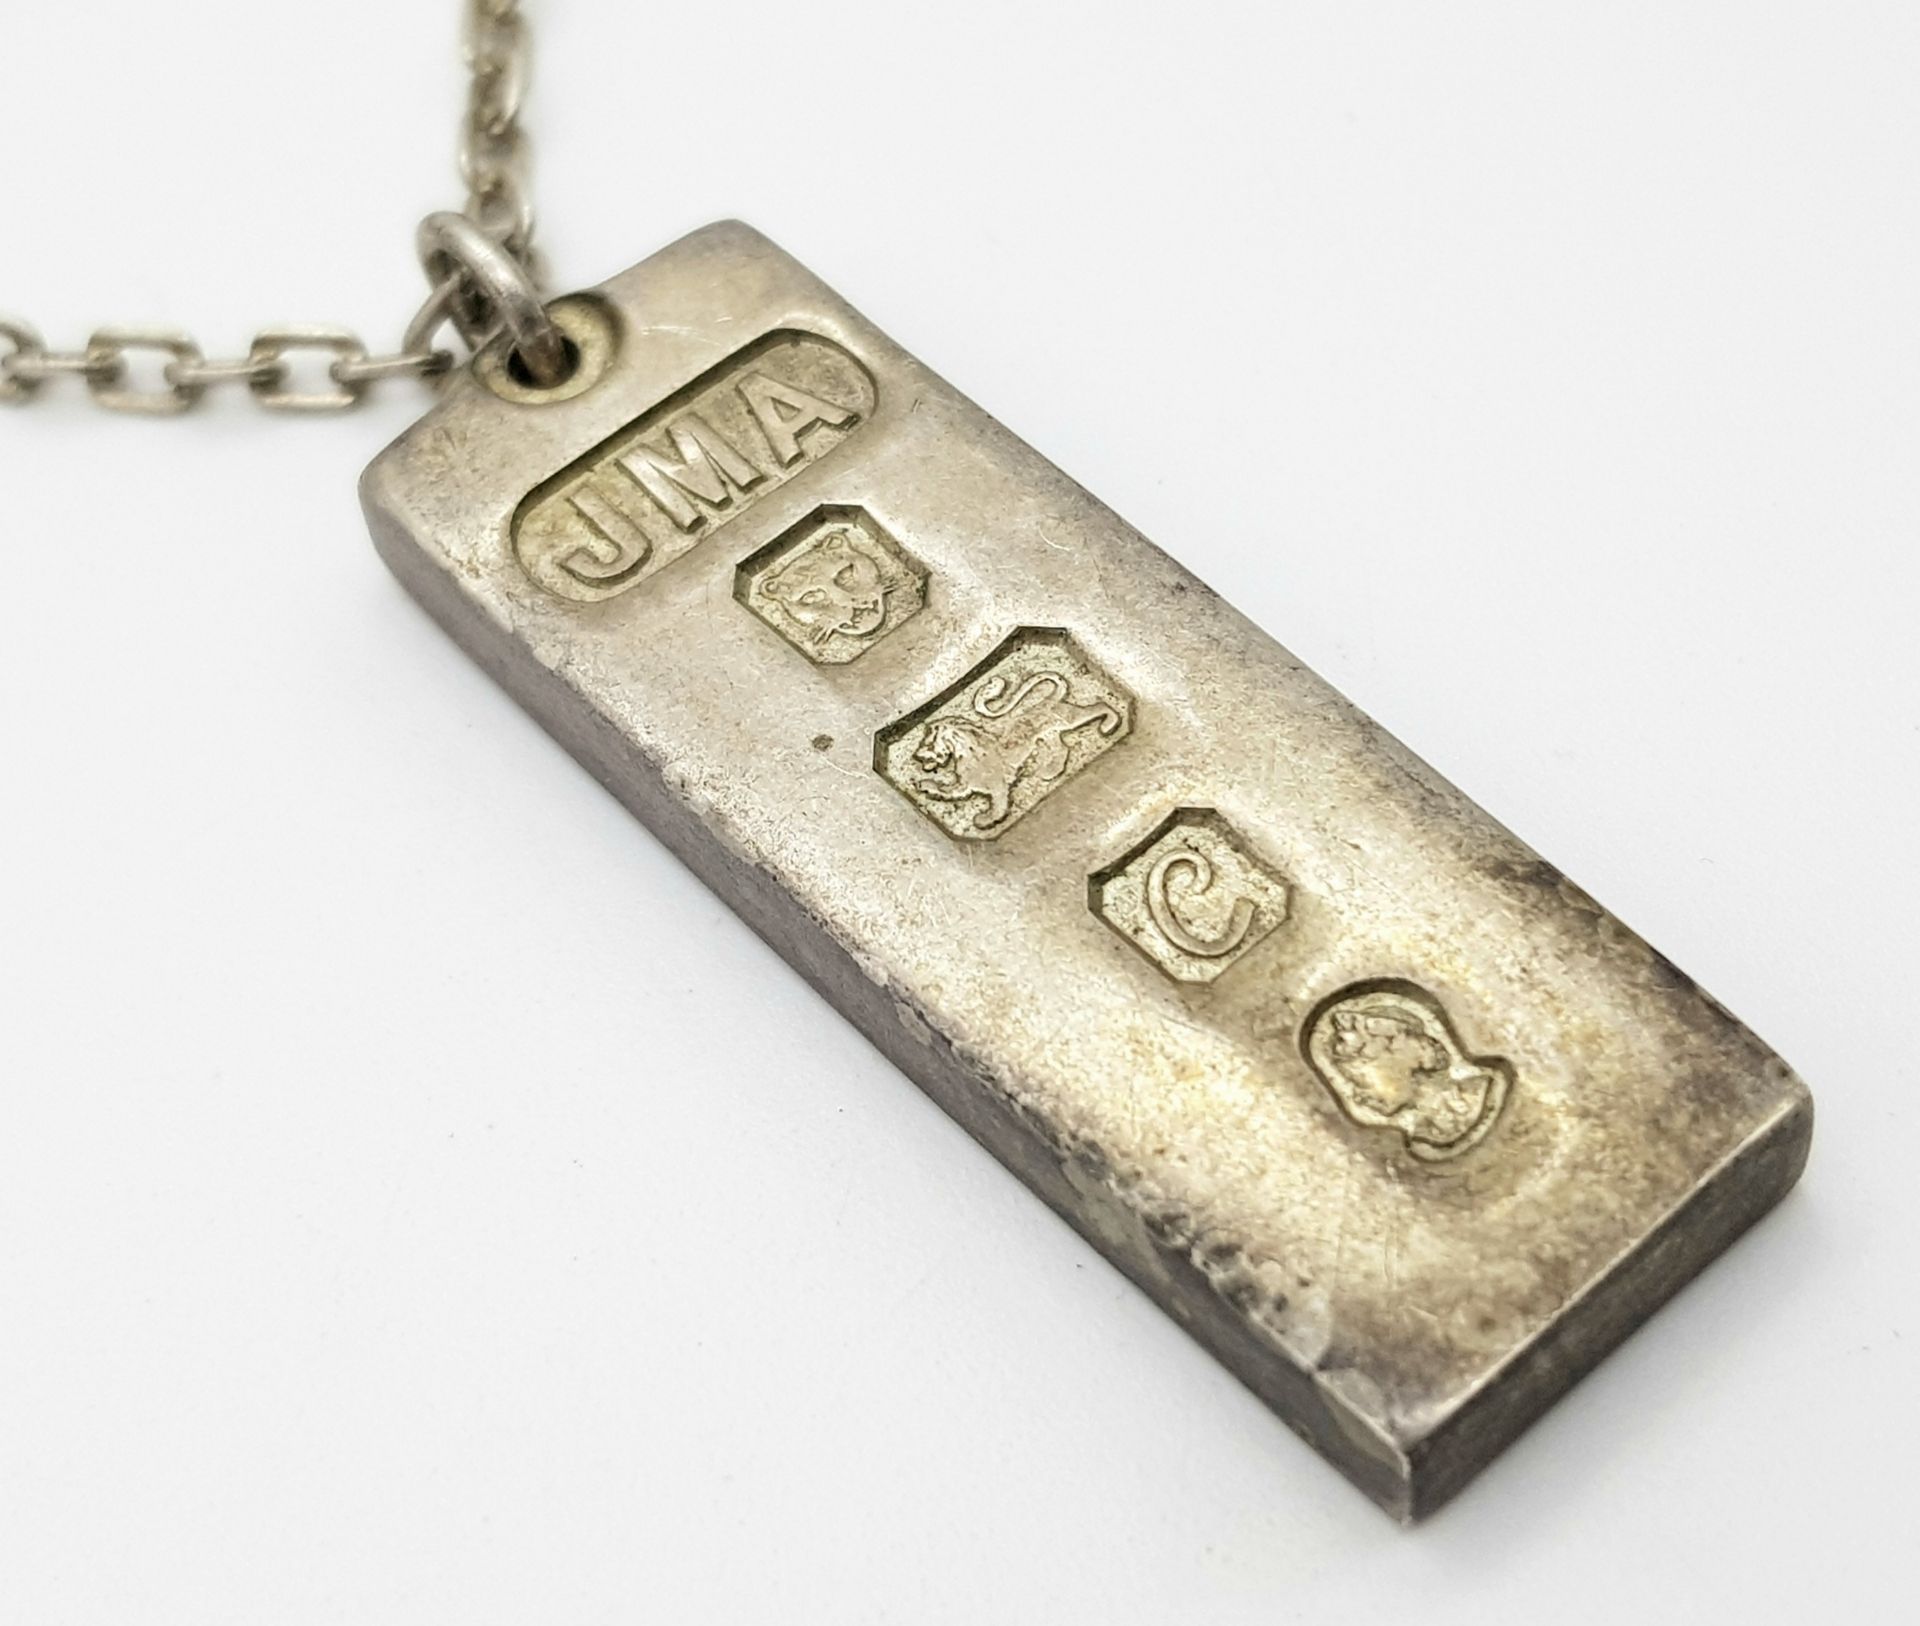 A Vintage Queen Elizabeth II Sterling Silver Jubilee Ingot on a Silver Chain. 4cm and 62cm. 38g - Image 2 of 4